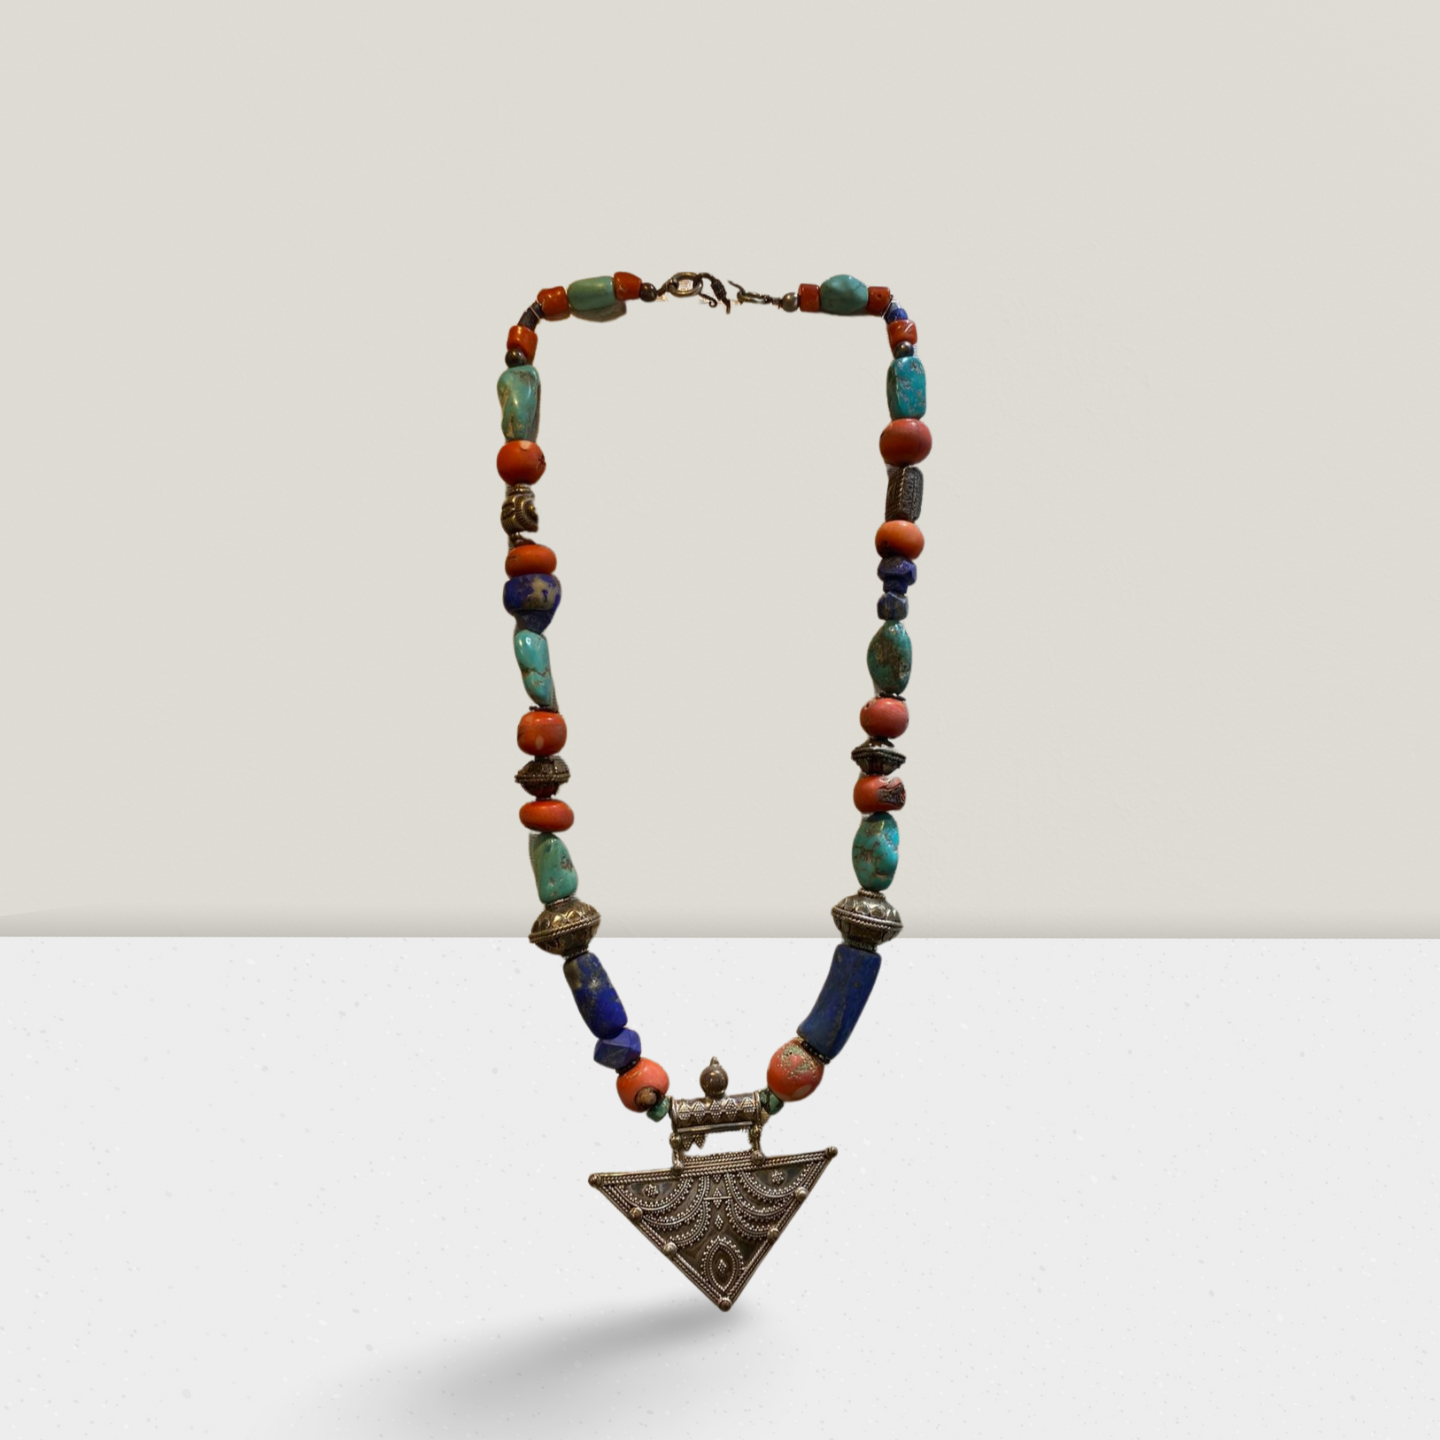 Necklace with Old Lapis Lazuli, Turquoise & Carnelian stone, with sterling silver elements